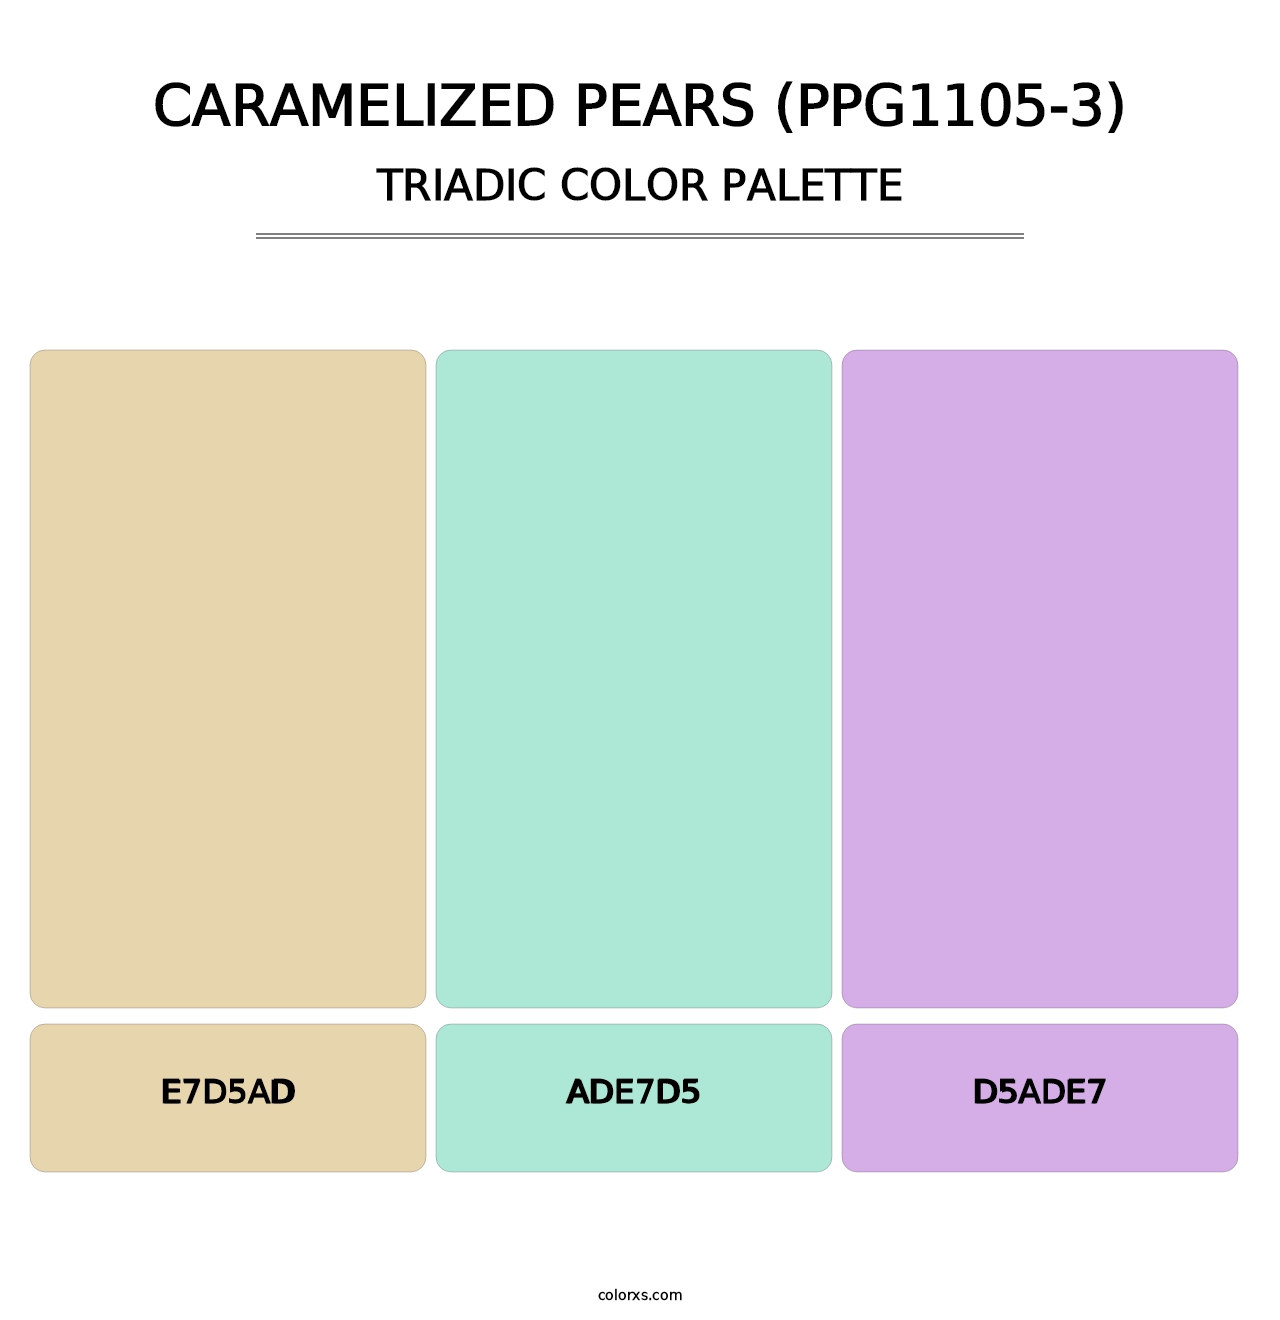 Caramelized Pears (PPG1105-3) - Triadic Color Palette